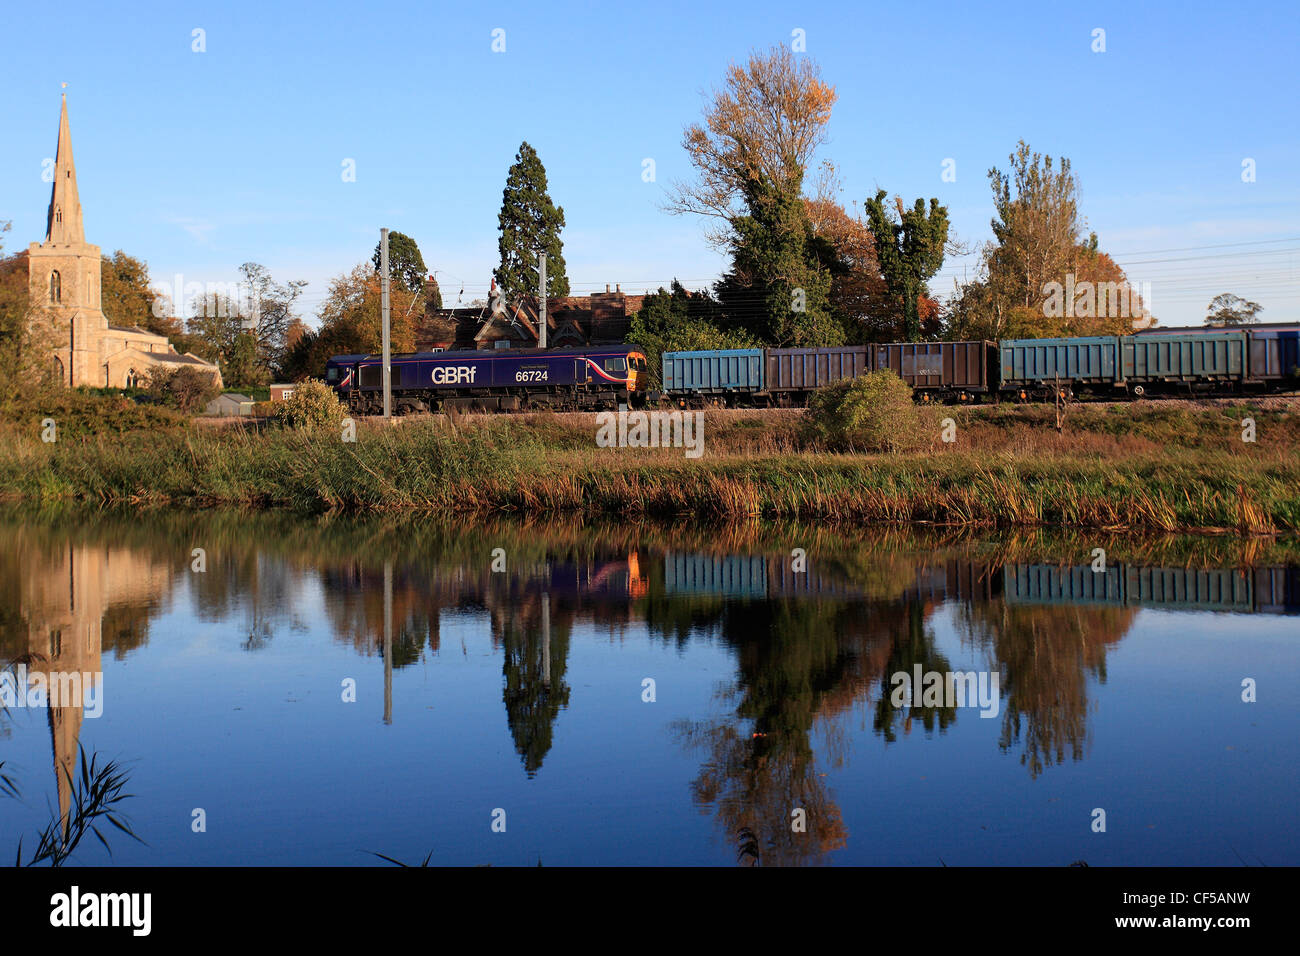 GBRF 66724 Diesel Powered Freight Train Pulling Containers, East Coast Main Line, River Great Ouse, Offord Cluny Cambridgeshire Stock Photo